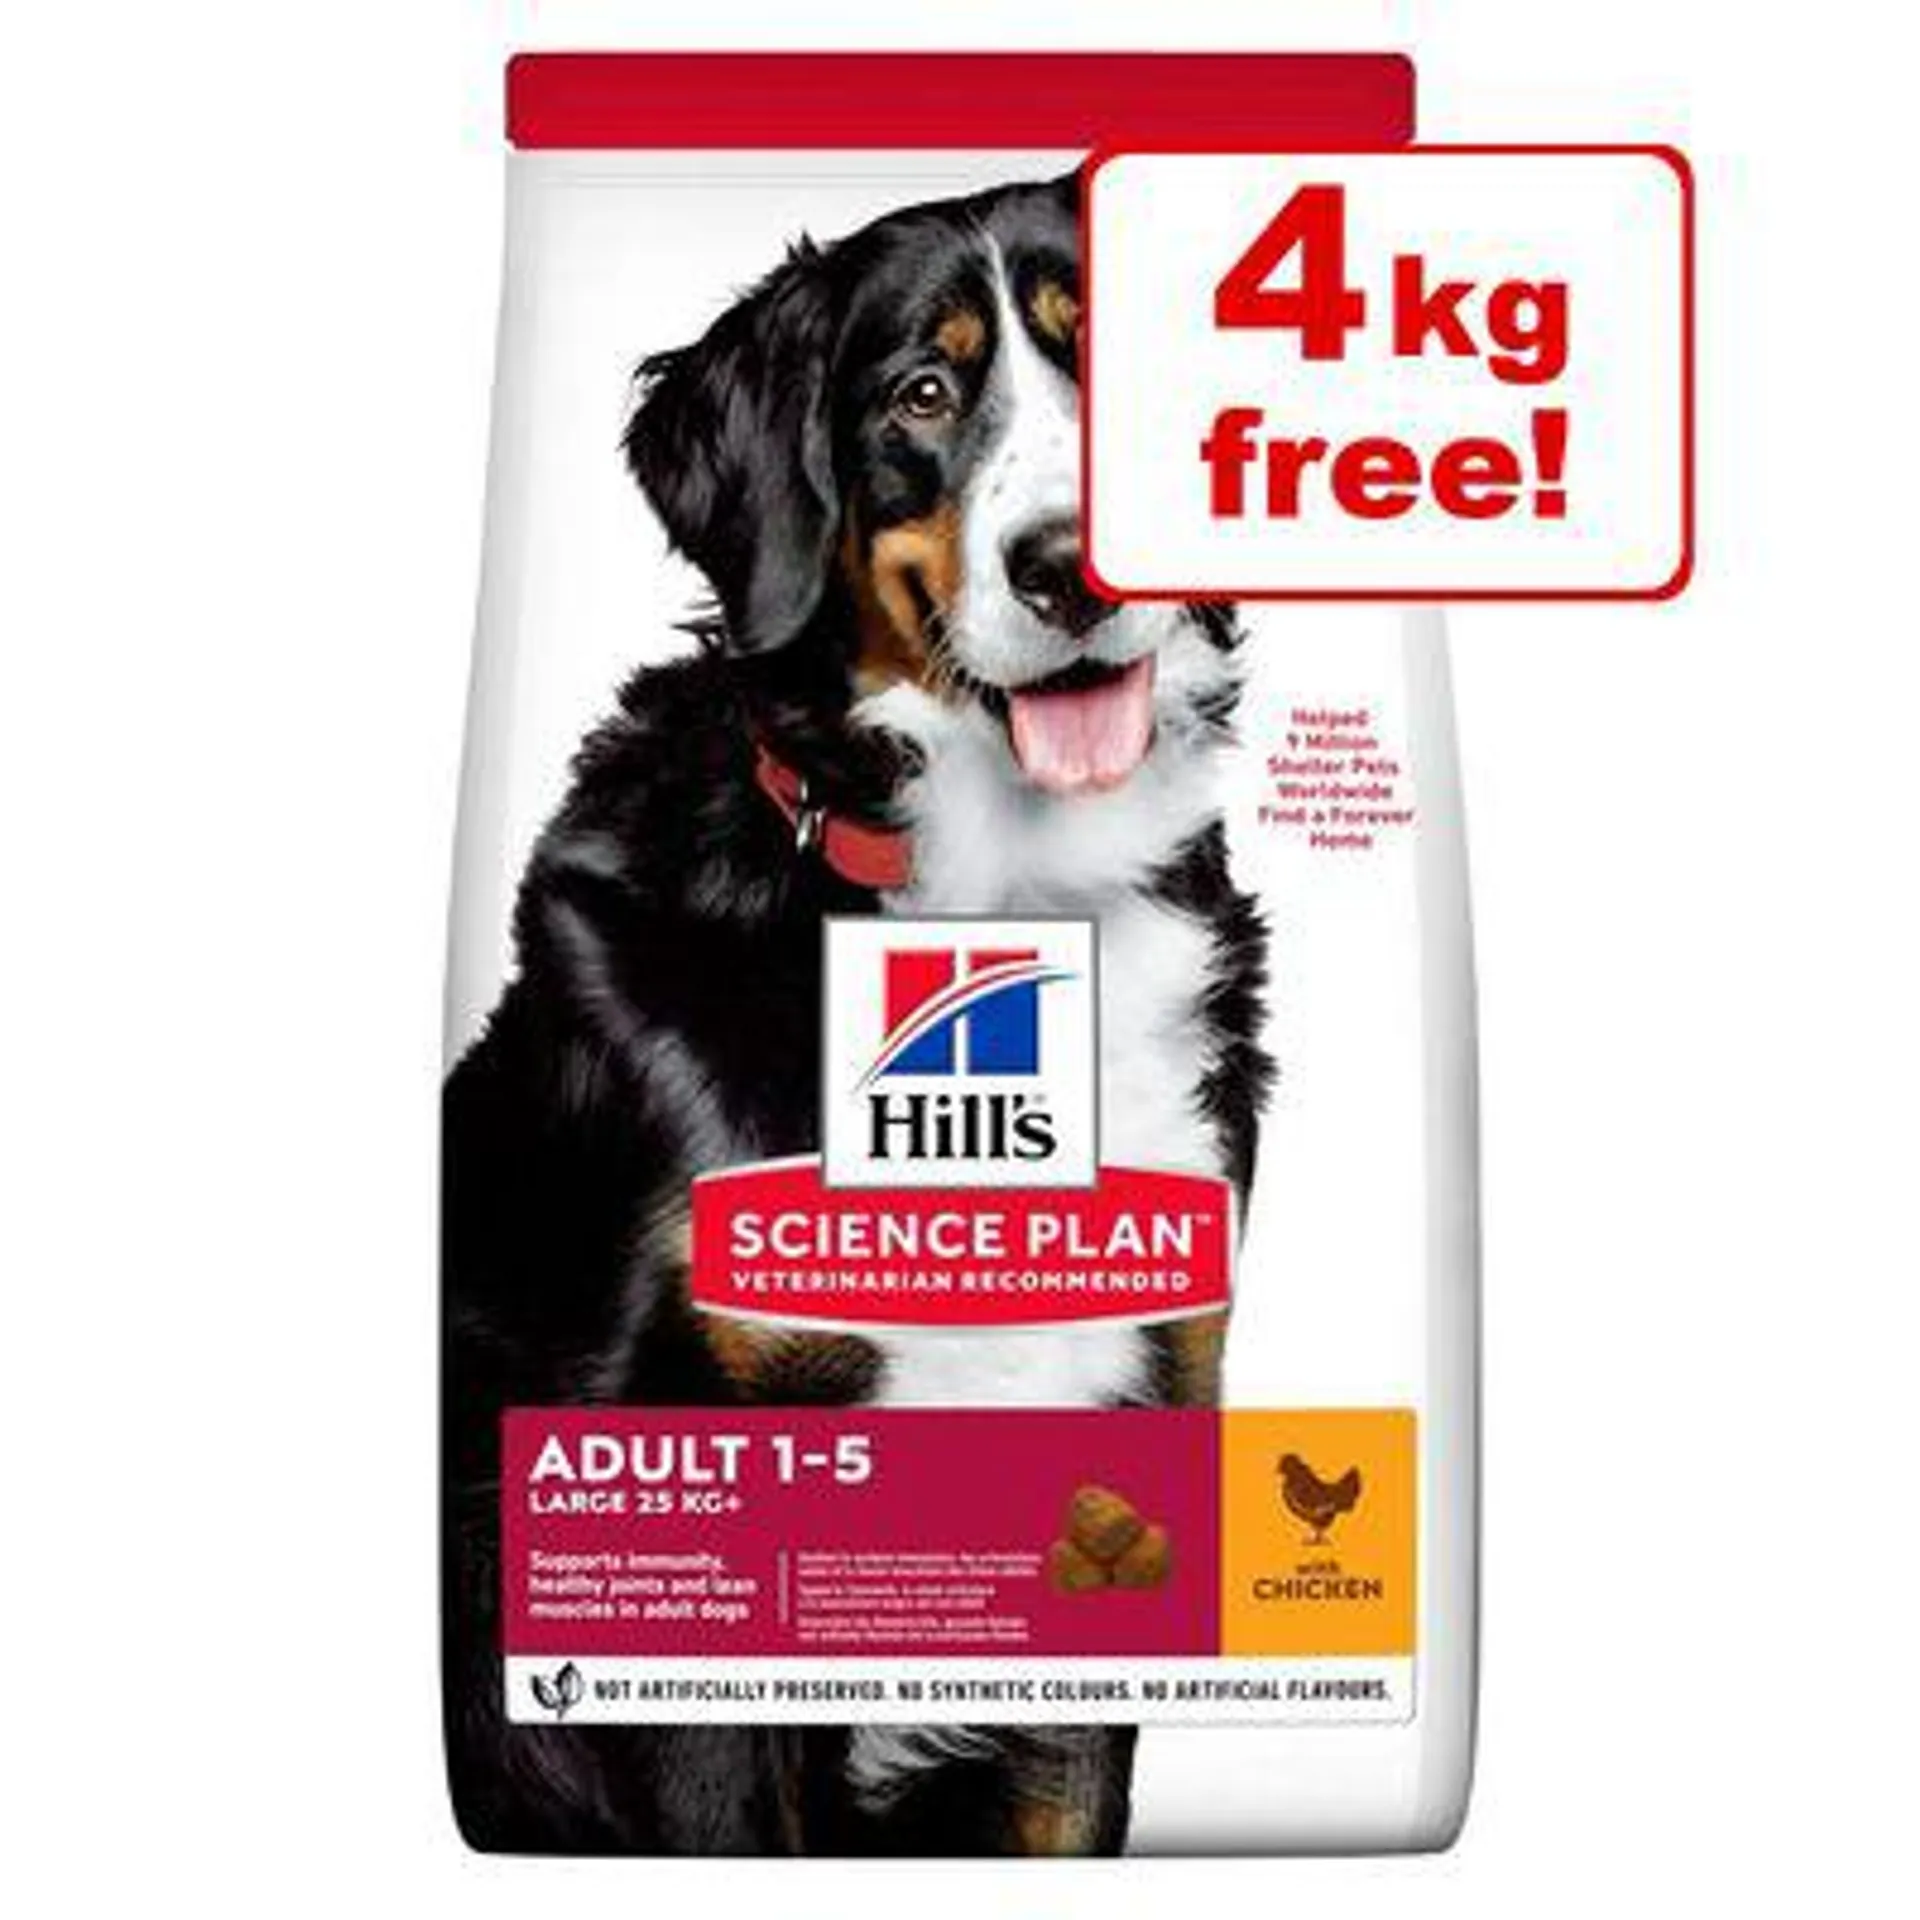 18kg Hill's Science Plan Adult/Puppy Dry Dog Food - 14kg + 4kg Free! *